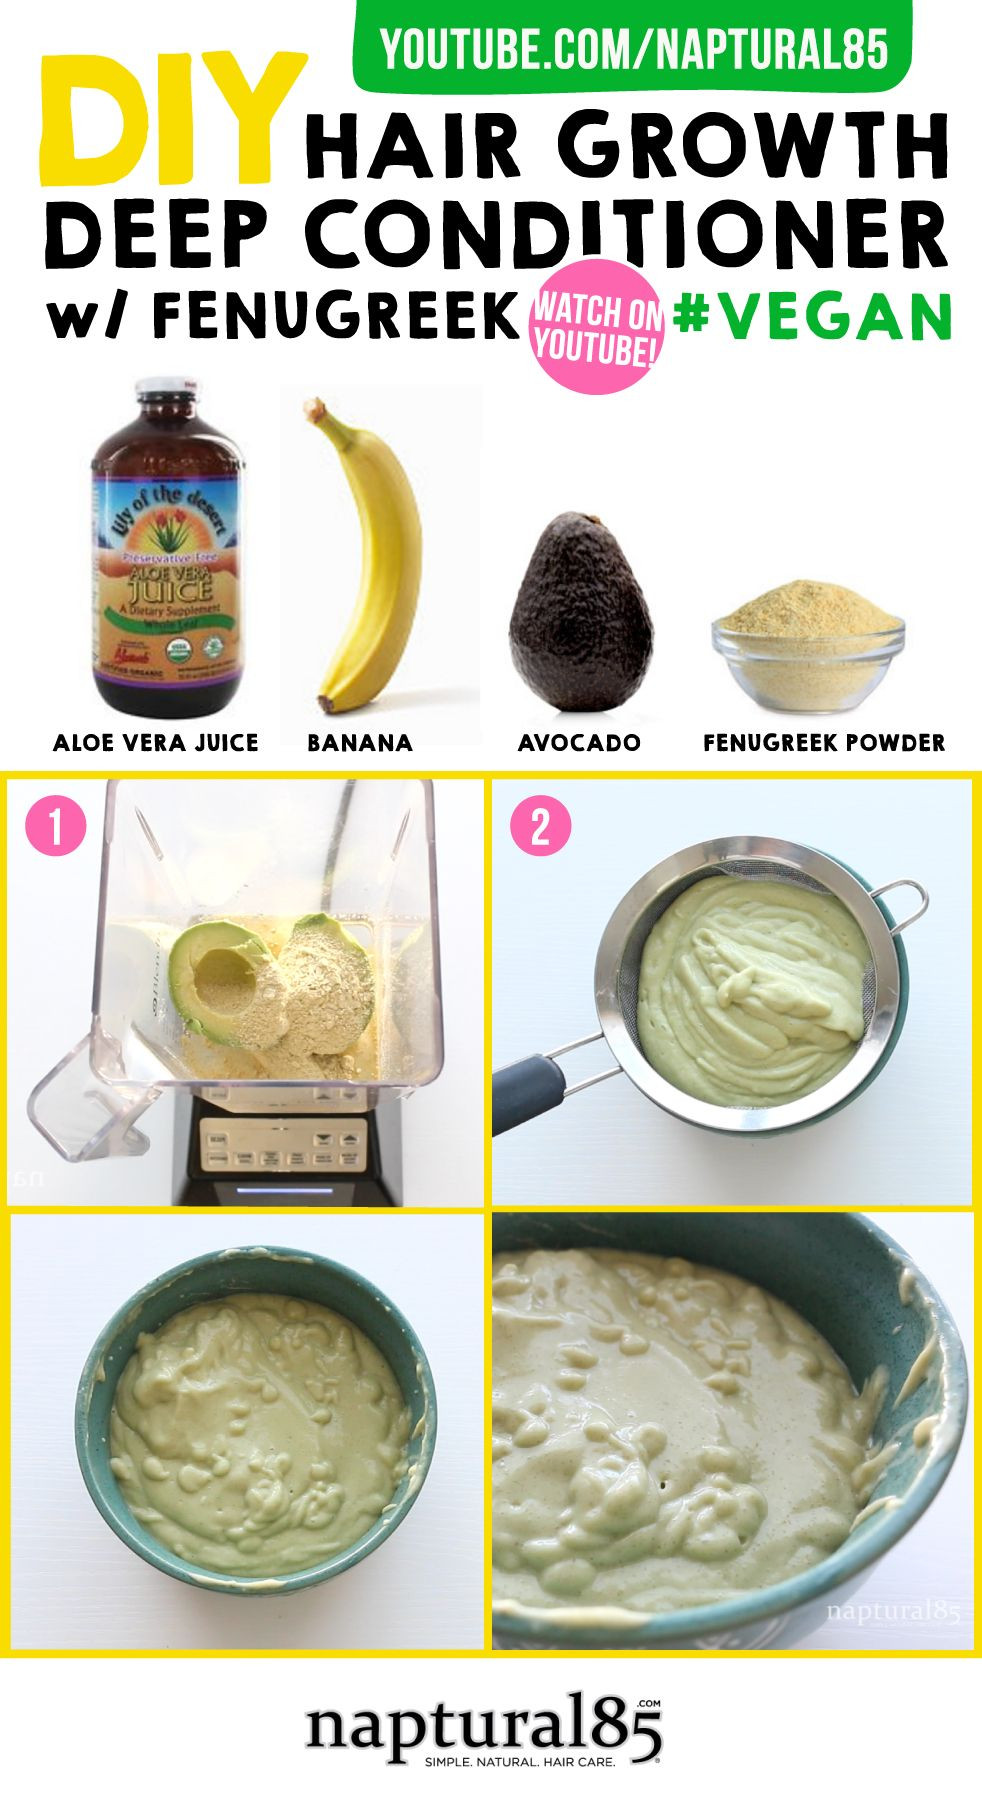 DIY Hair Treatments For Growth
 I ve been meaning to try a mask with banana and avocado in